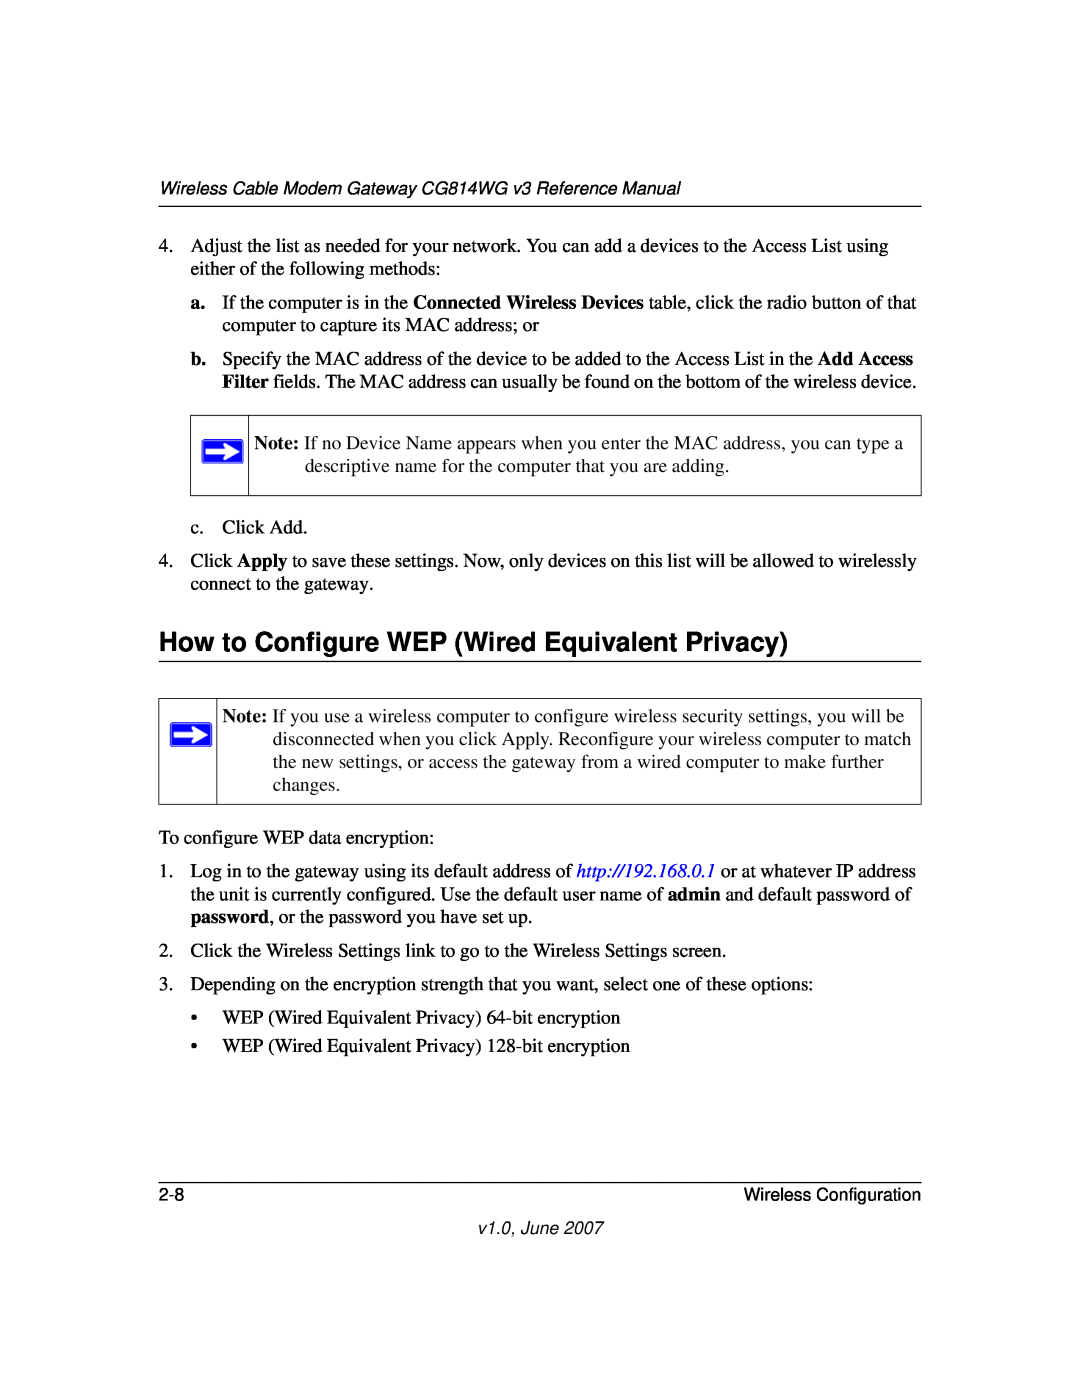 NETGEAR CG814WG V3 manual How to Configure WEP Wired Equivalent Privacy 